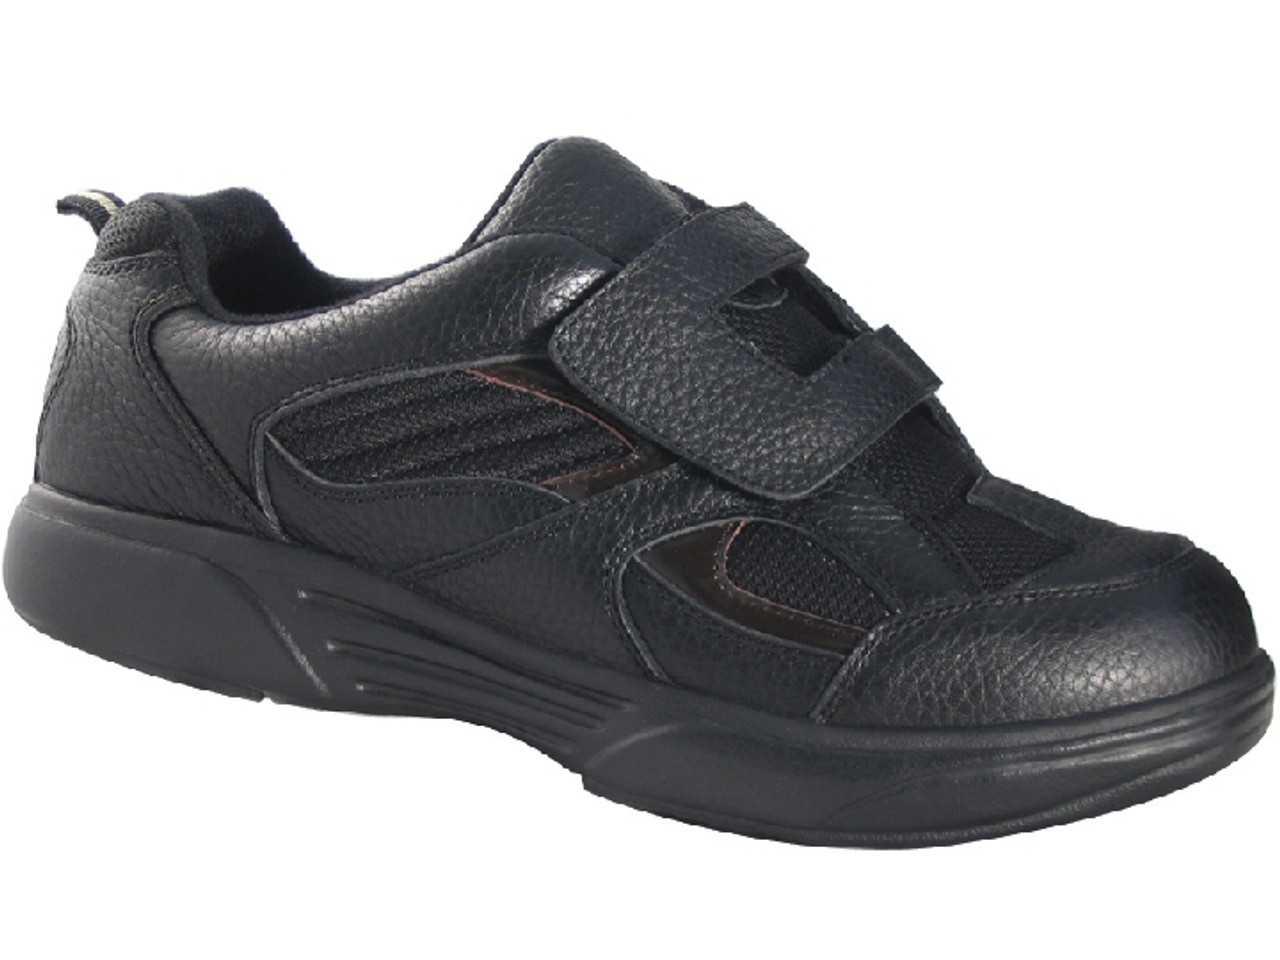 Buy KazarMax Solid Velcro Closure School Shoes Black for Both (3-4Years)  Online, Shop at FirstCry.com - 13261992